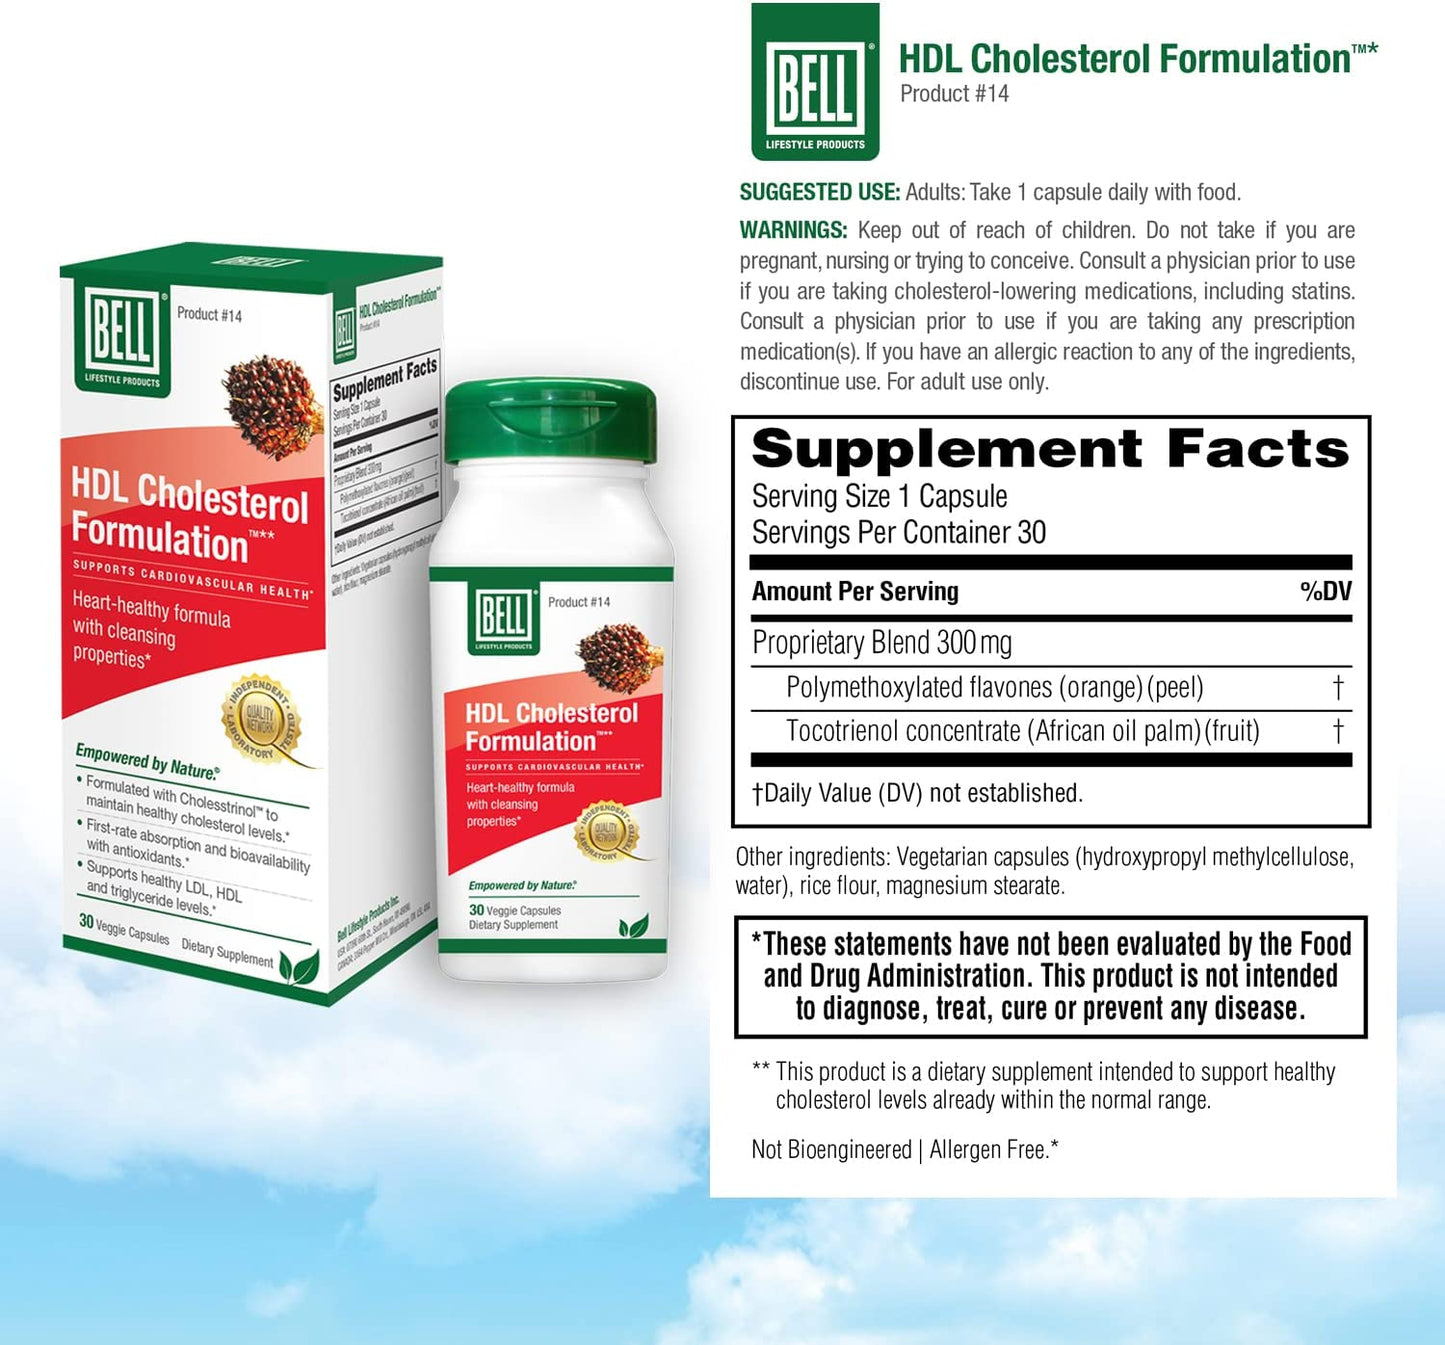 Bell HDL Cholesterol Formulation - Proprietary Blend, for Women and Men